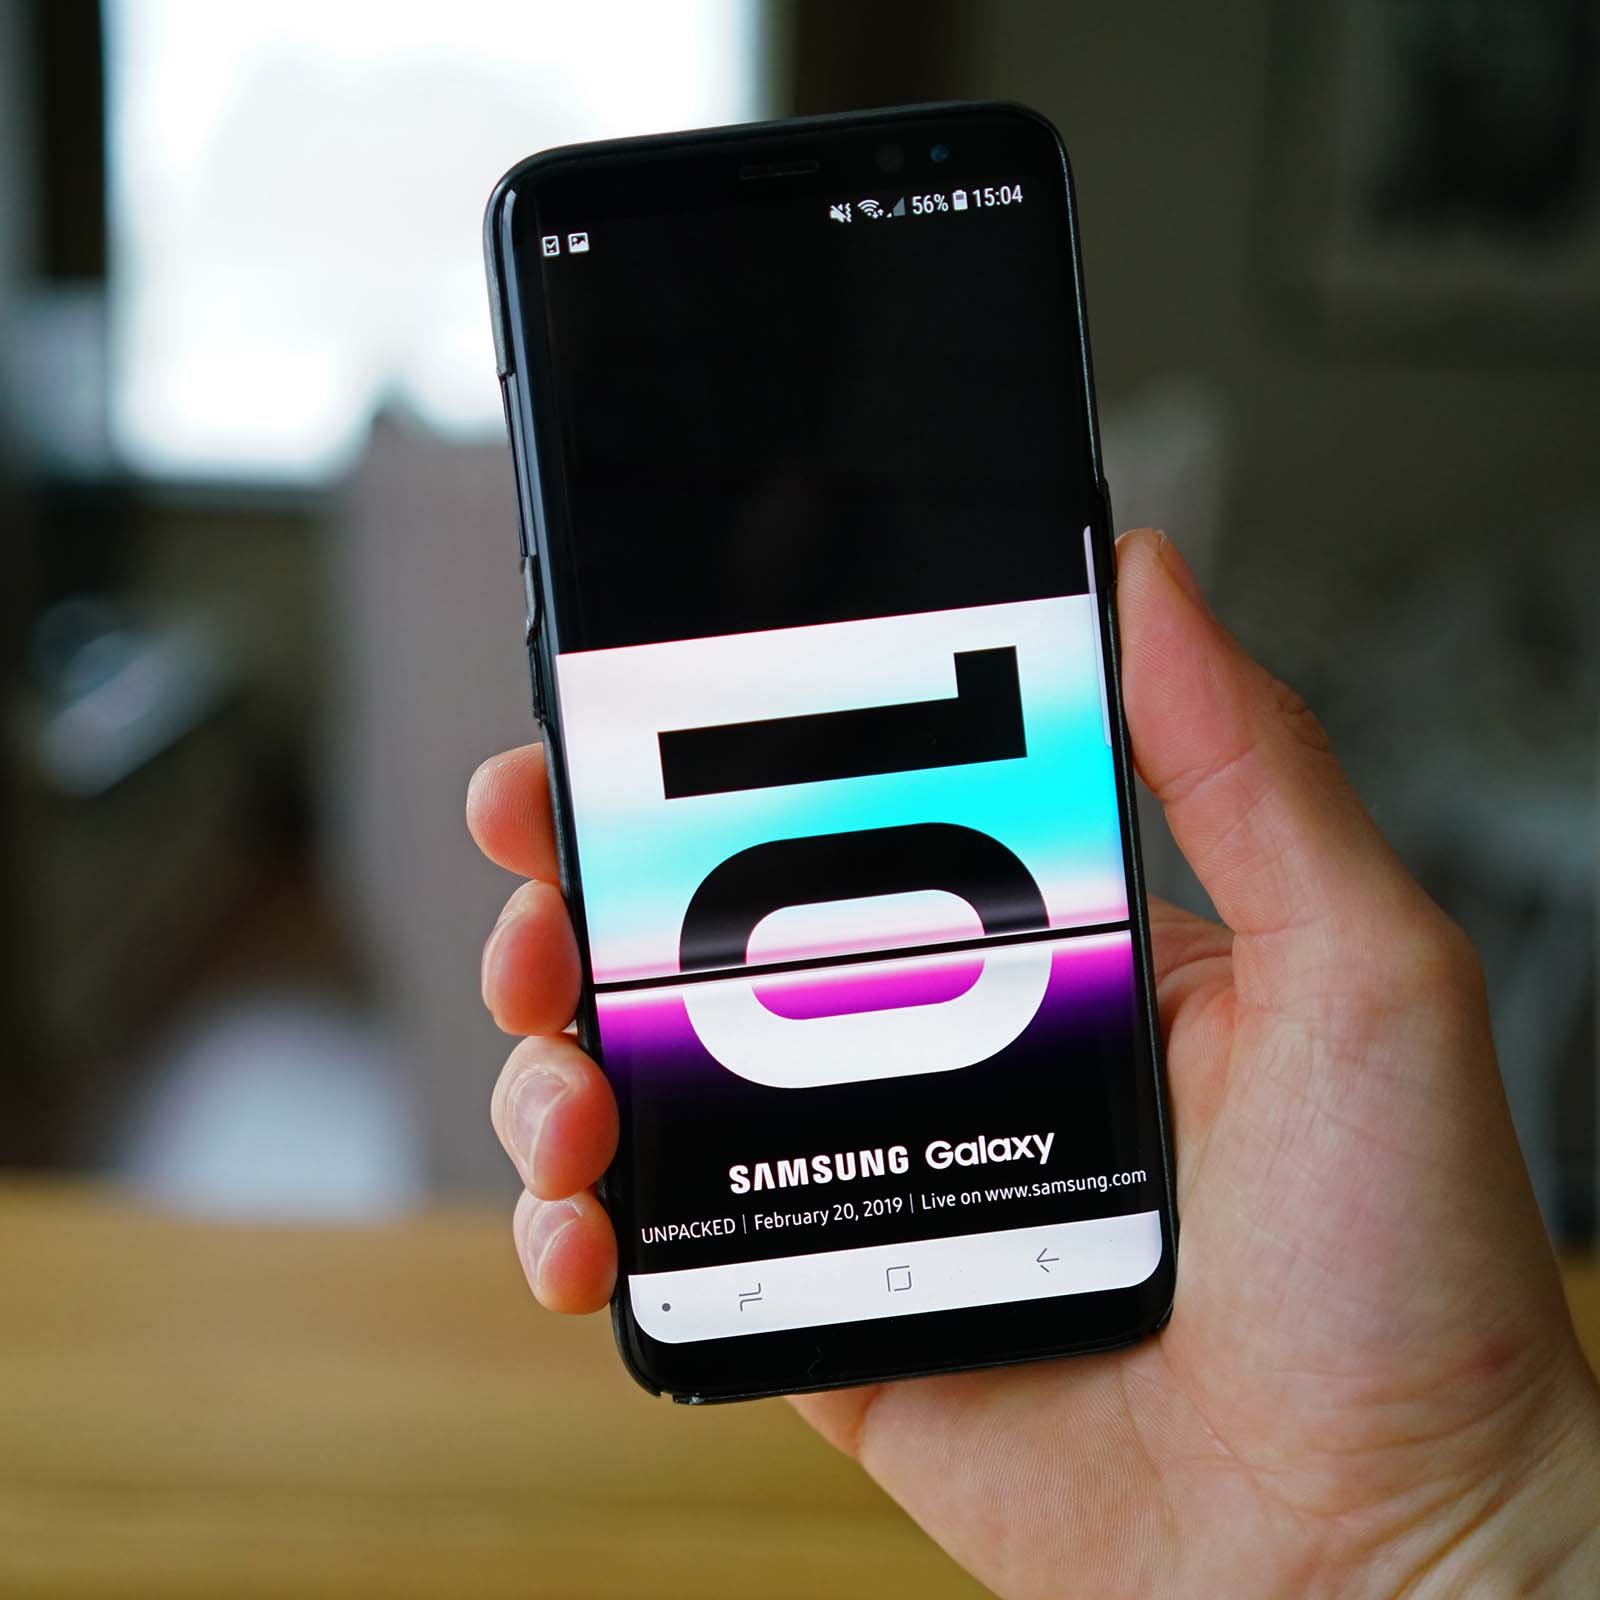 Leaked Images Reignite Expectations for Crypto Wallet in Galaxy S10